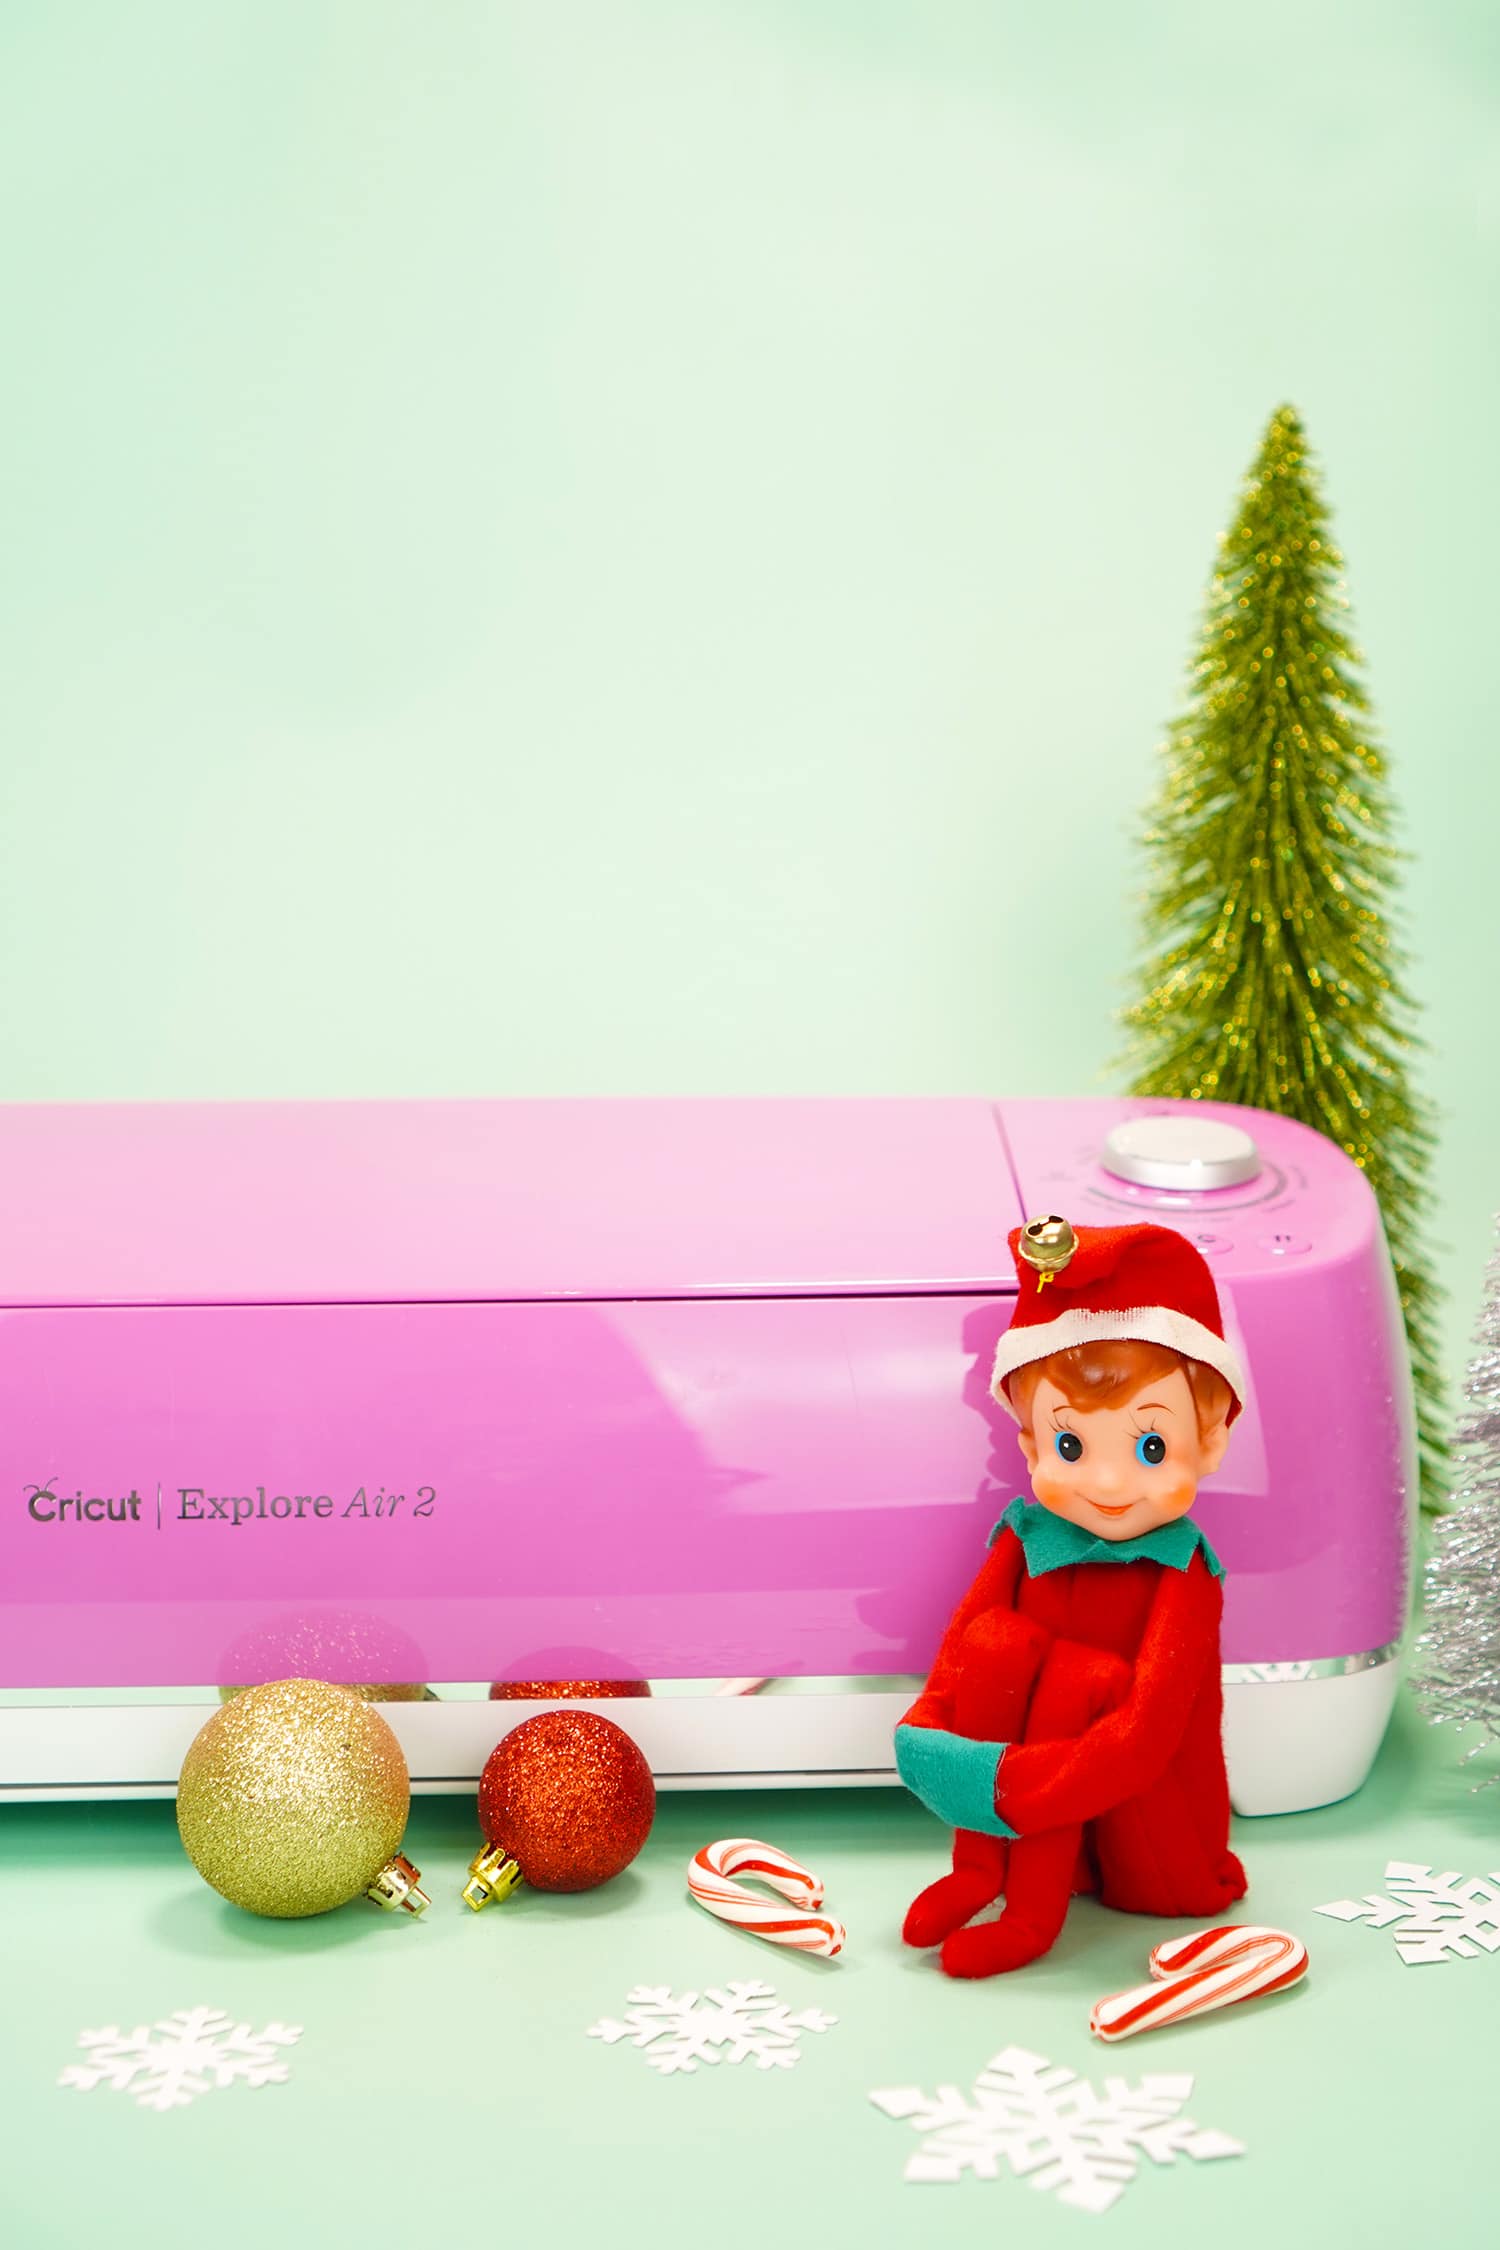 The Best Cricut Holiday Gift Ideas for Crafters